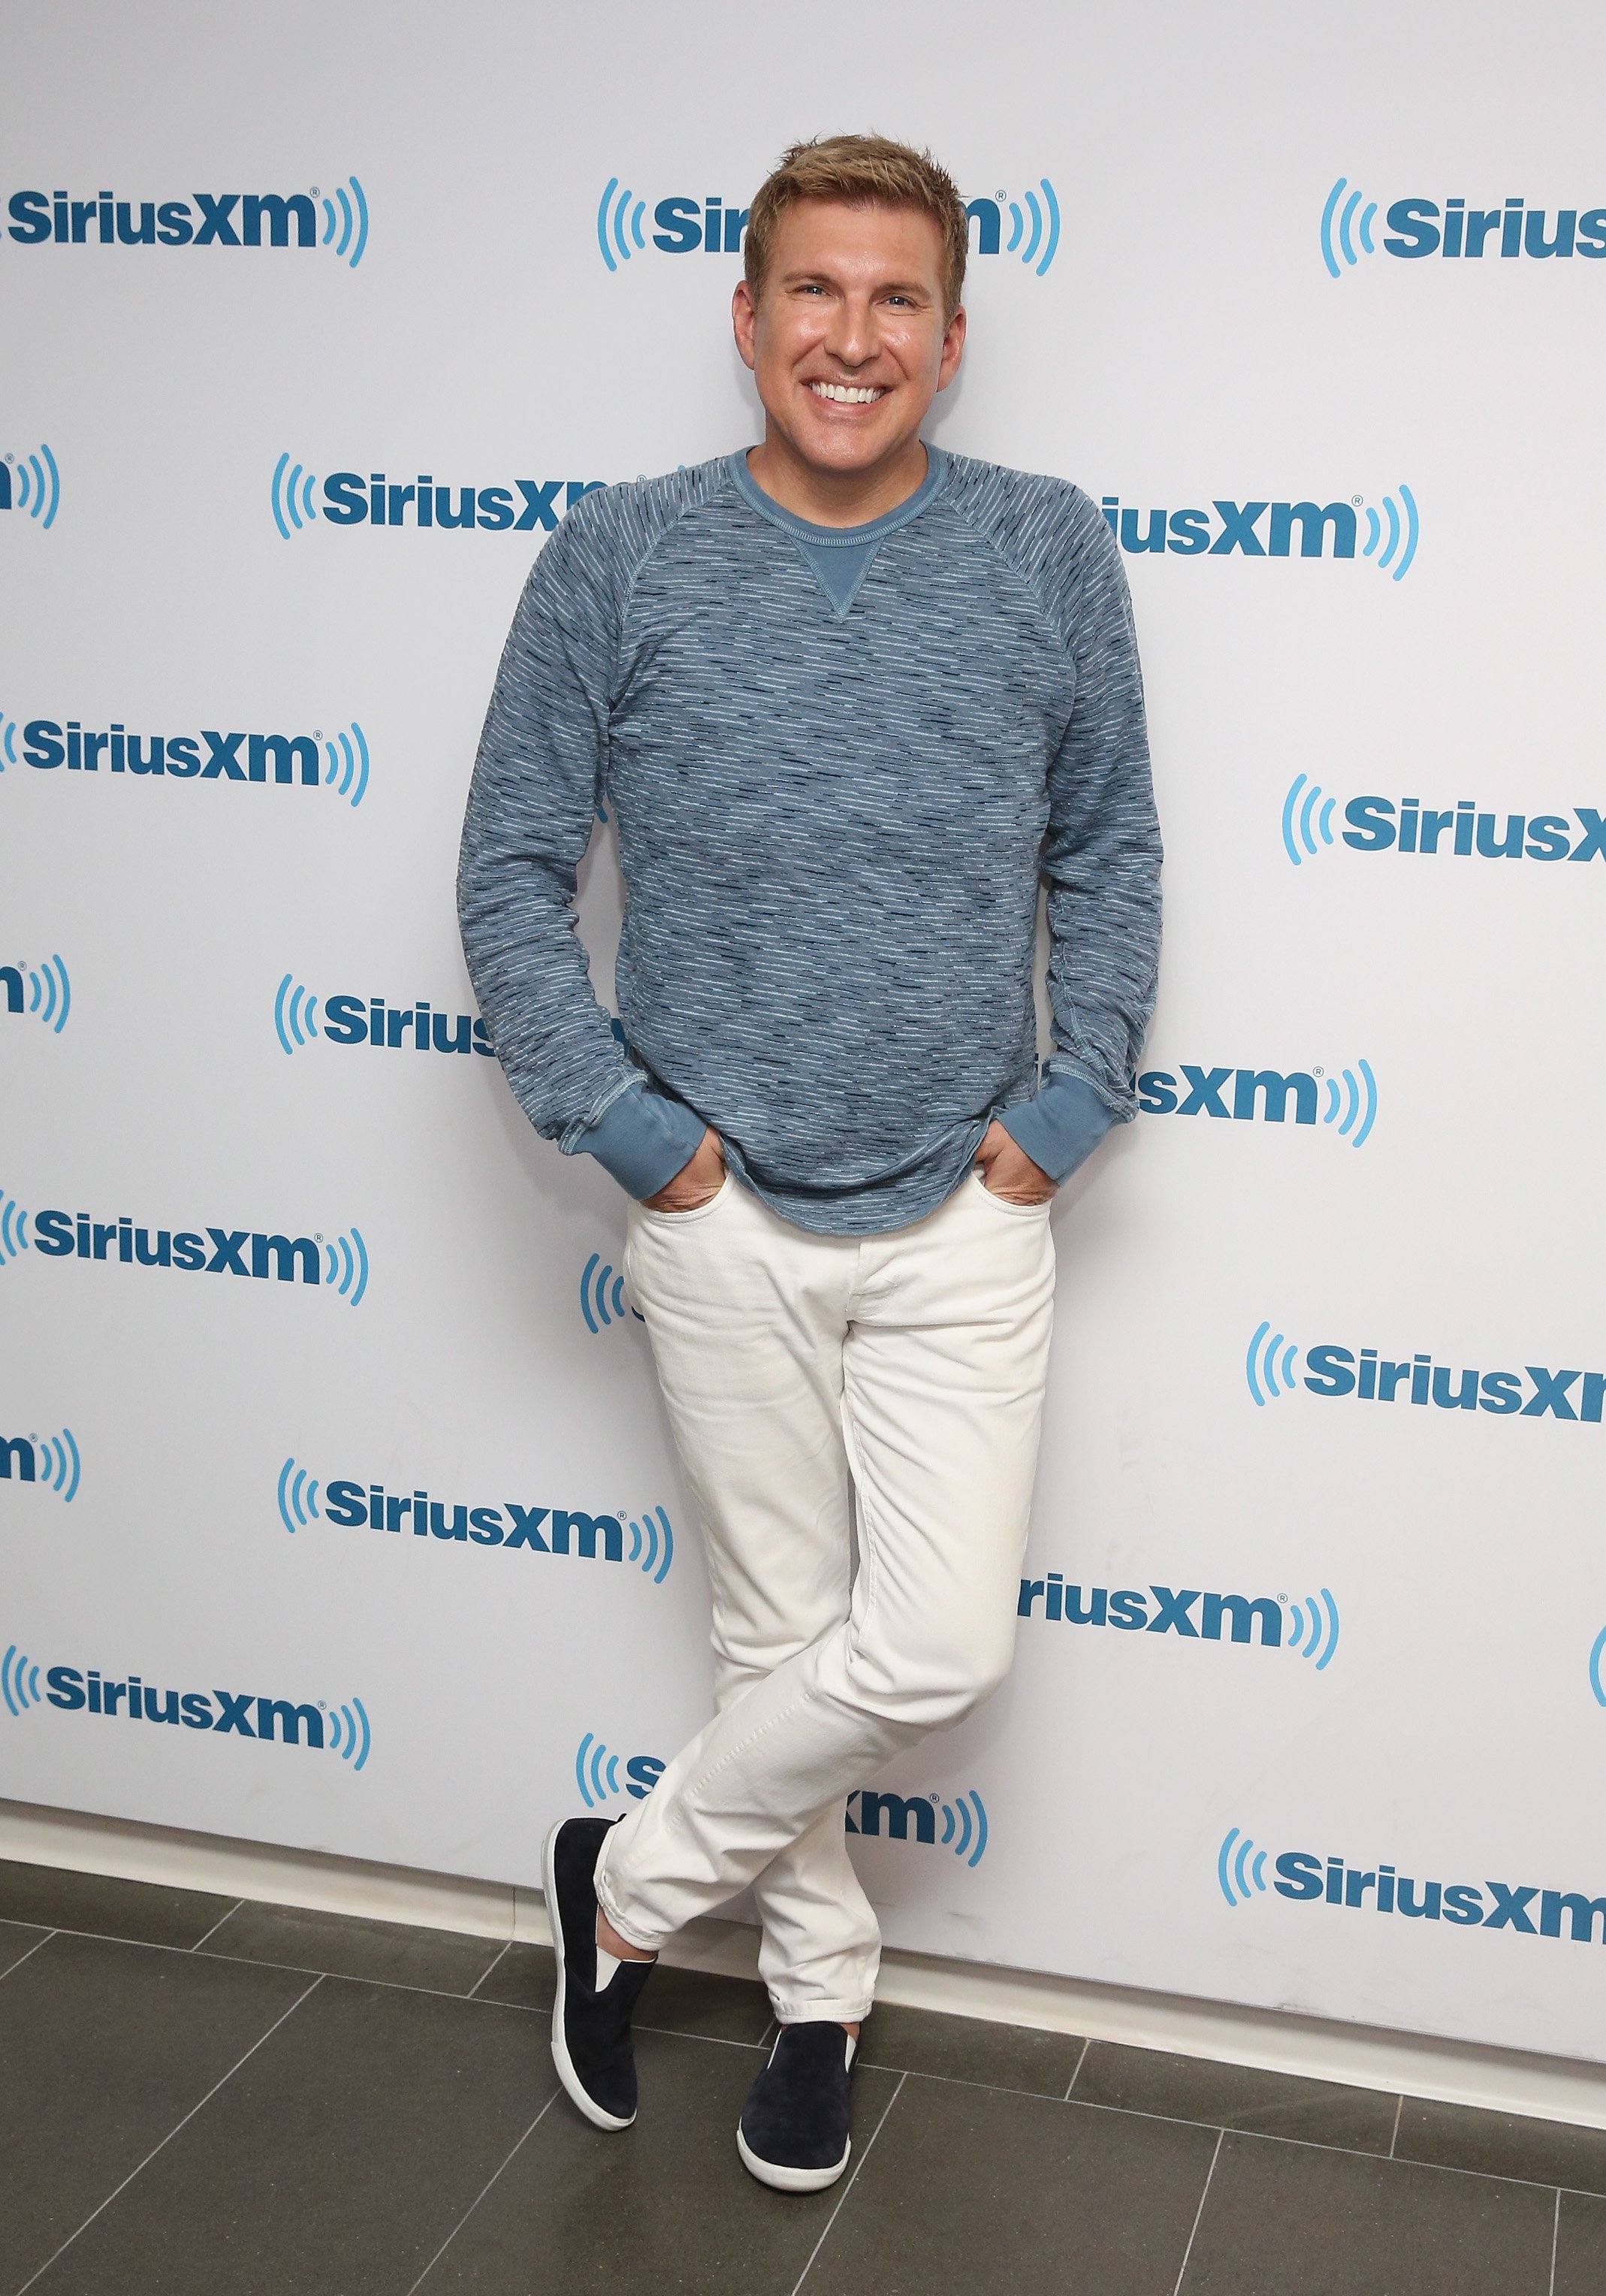 Businessman Todd Chrisley, who stars on the show, "Chrisley Knows Best," visits the SiriusXM Studios in 2015 in New York City.